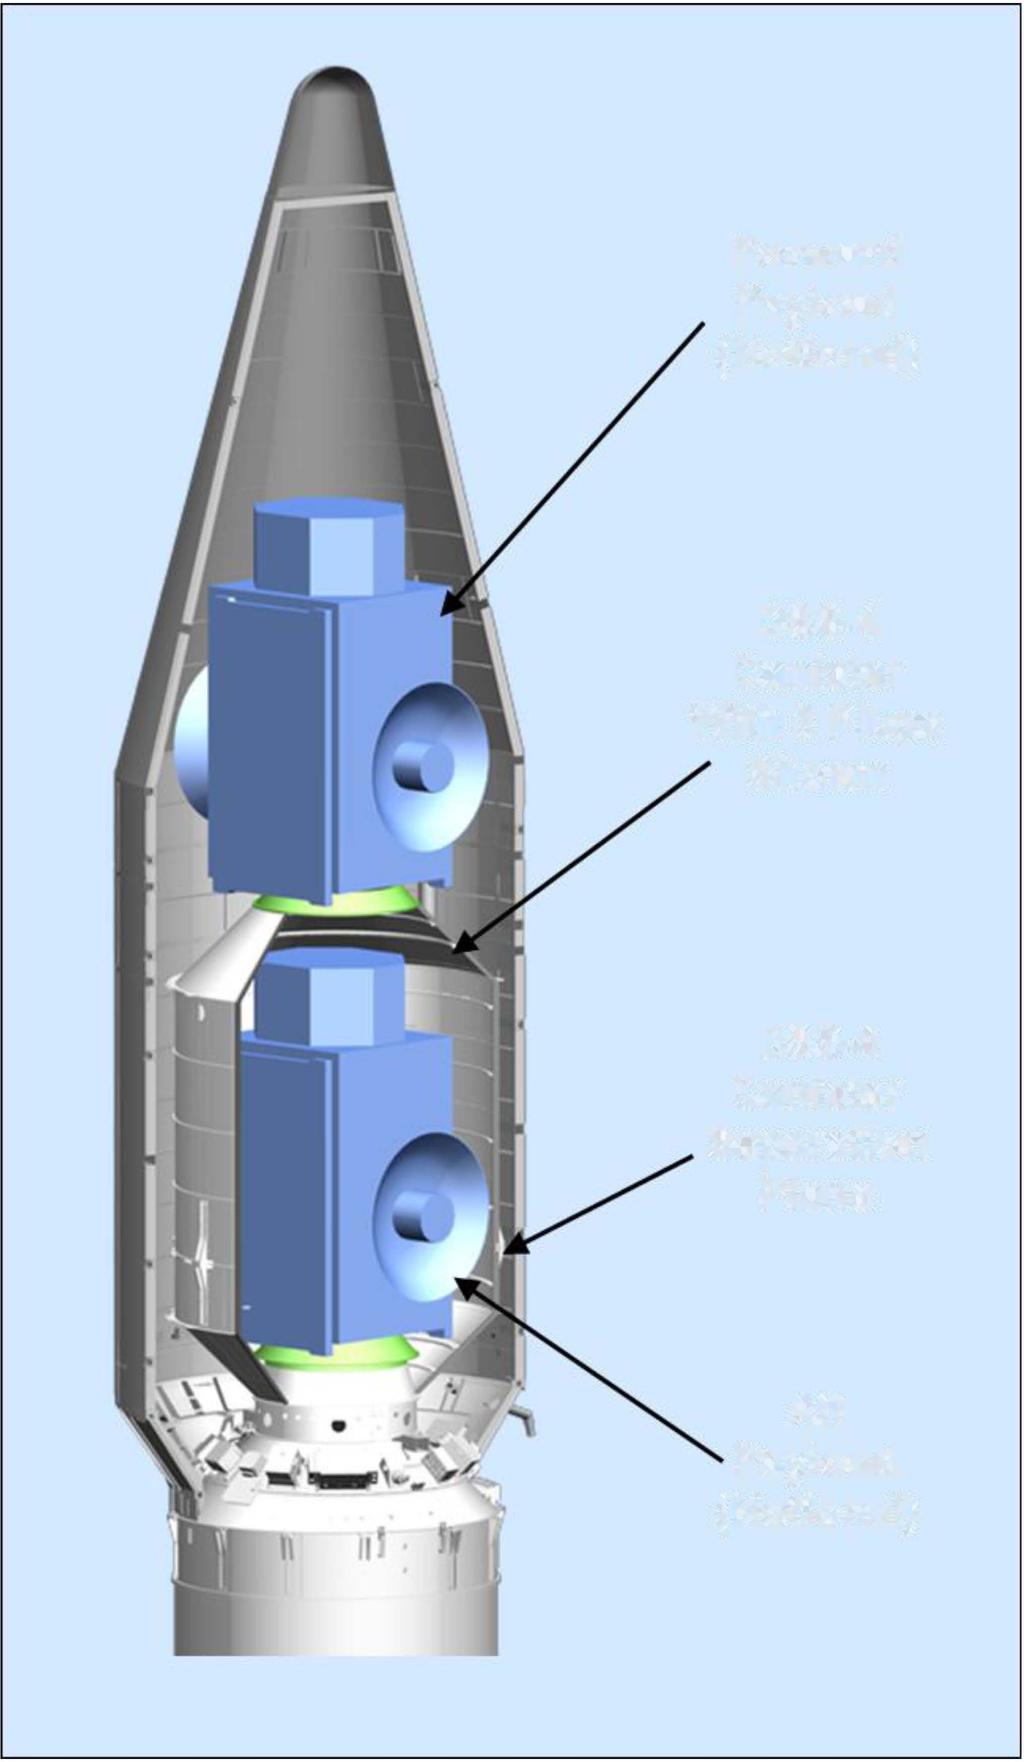 In the DSS-4 application, the cylindrical parts of a lower, inverted CF A and an upper, non-inverted CFA mate together. This creates a canister which contains the lower spacecraft.